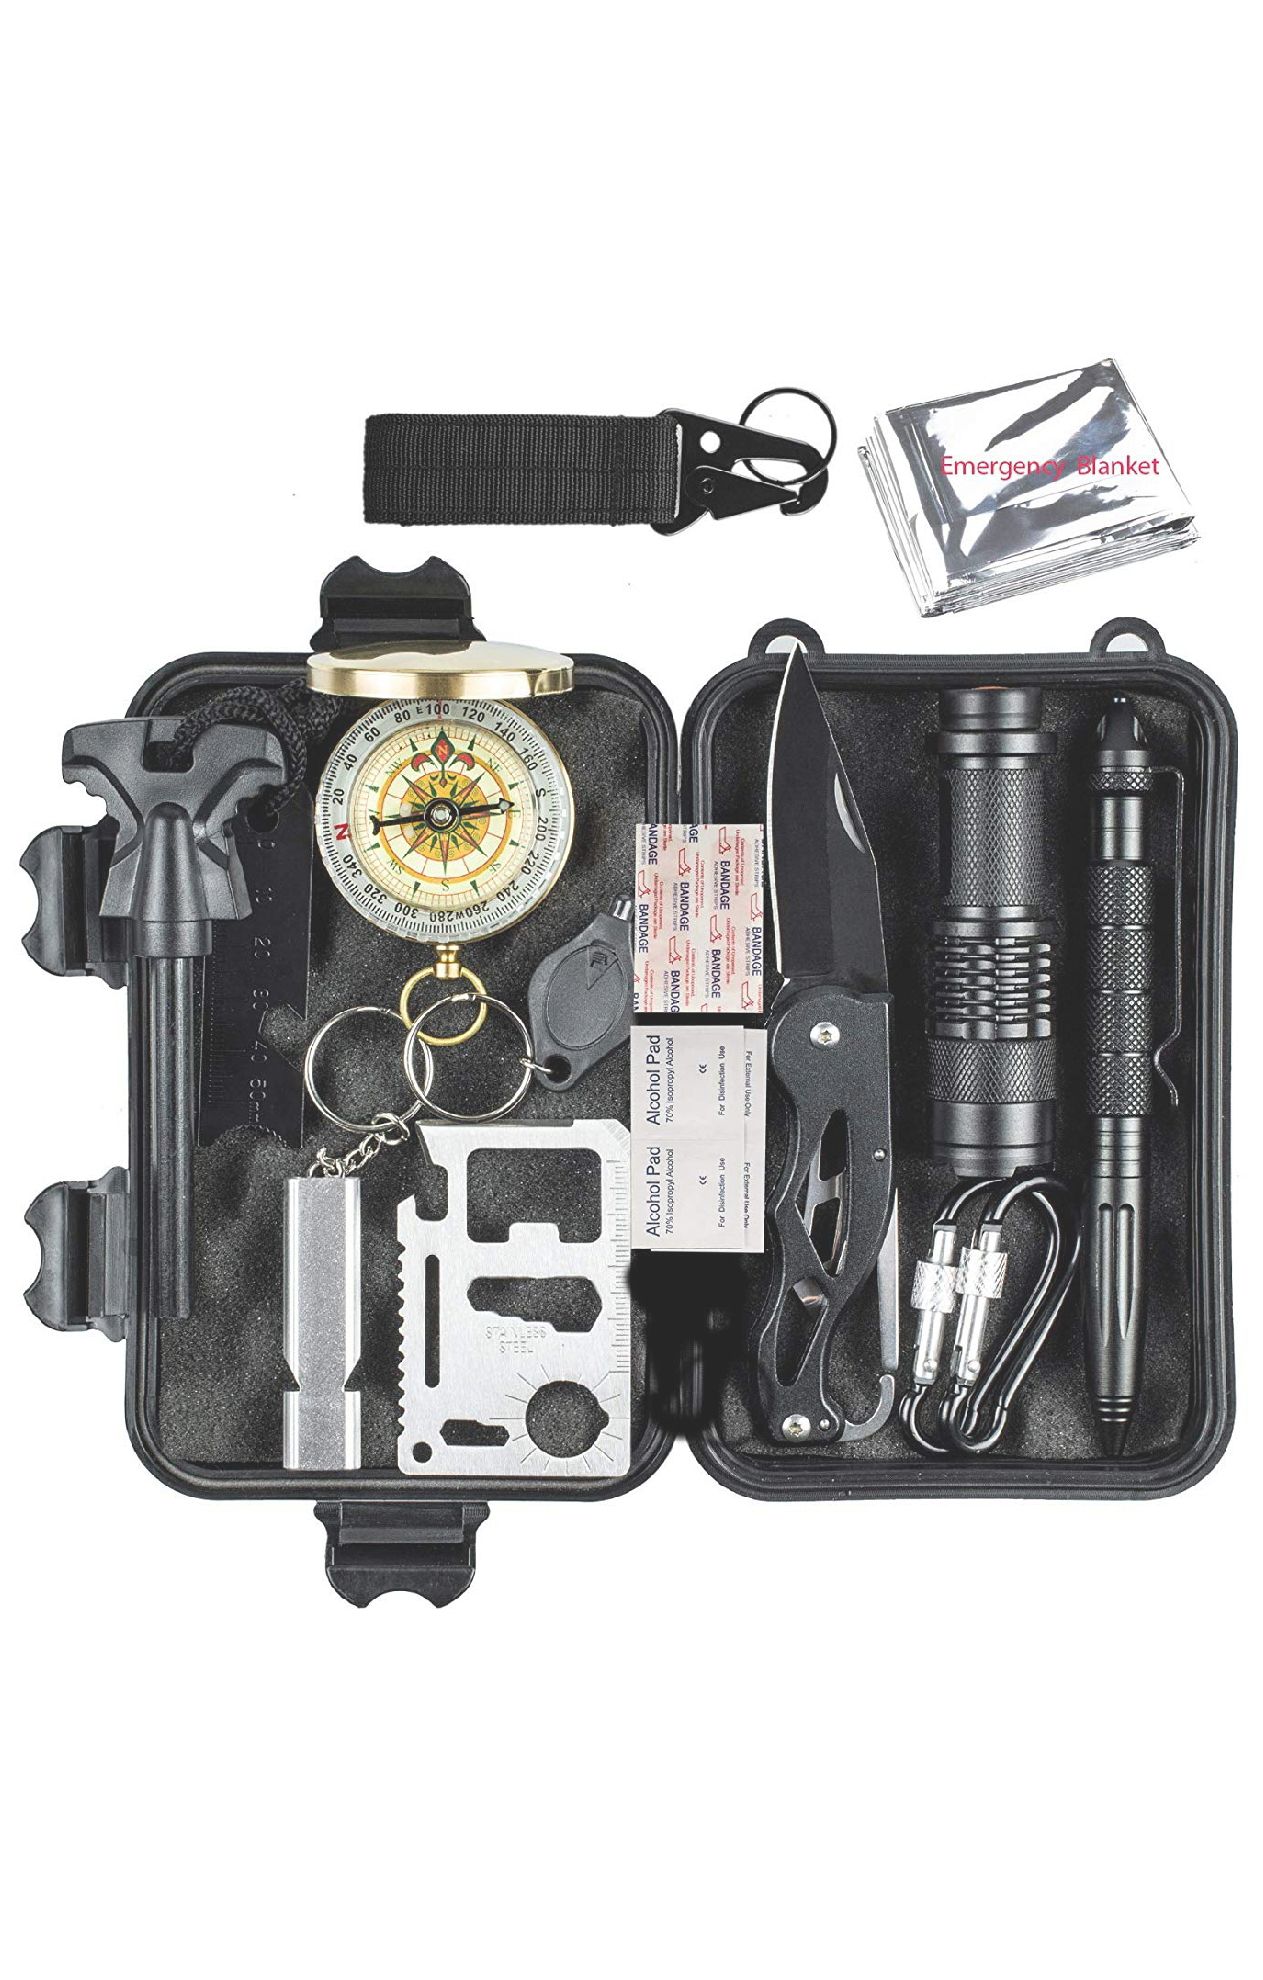 Orikateck Emergency 15 in 1 Survival Kit knife Compass First Aid Case